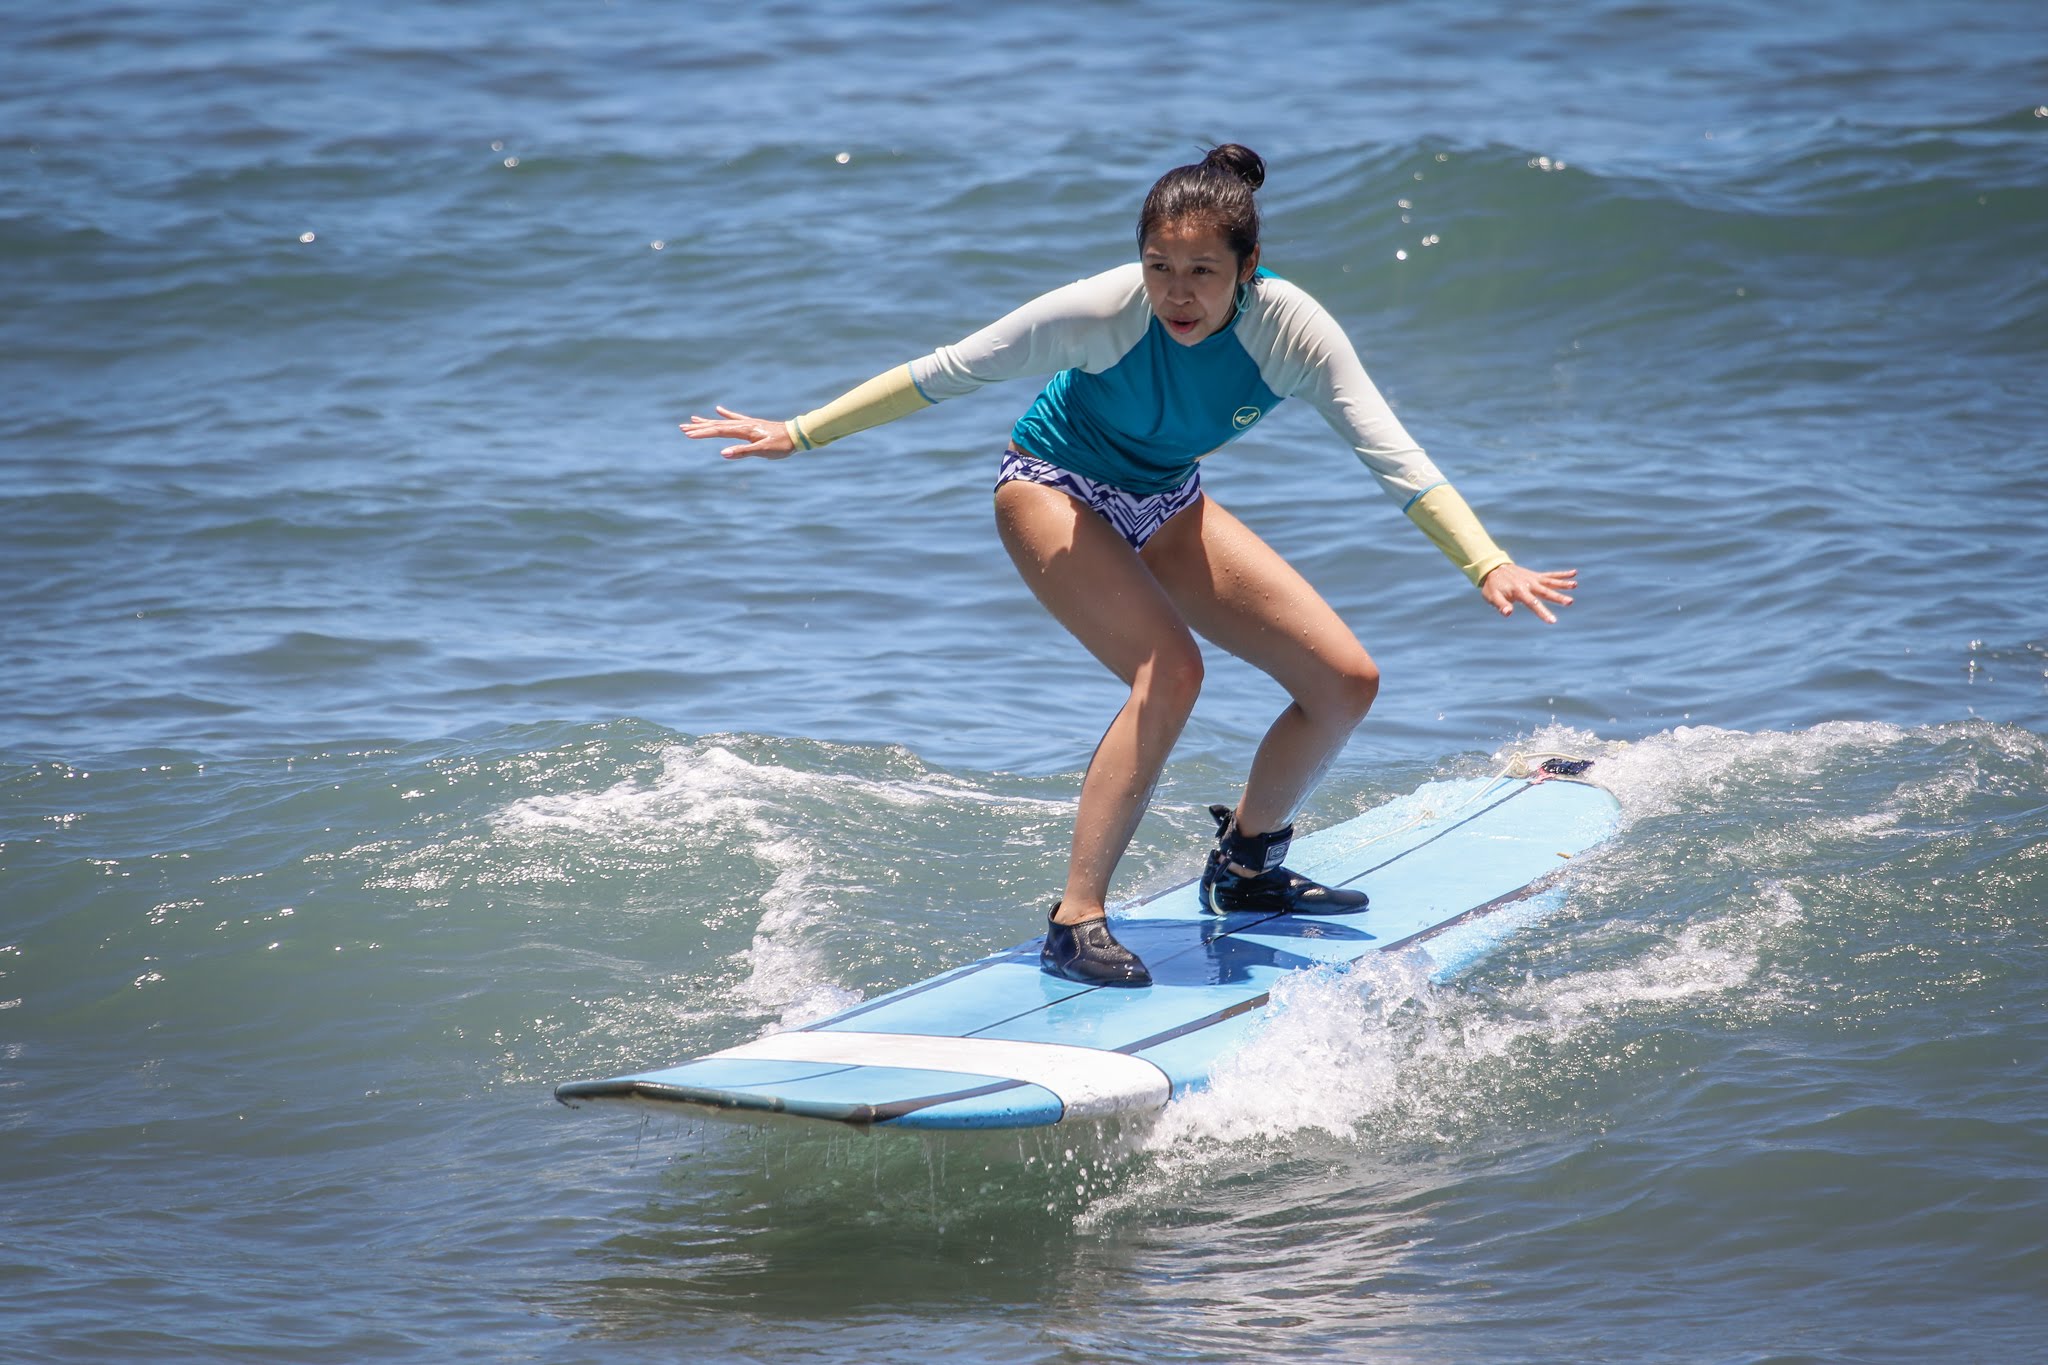 Tiffany Chin, a Chinese-American woman, holds her arms out as she rides a surfboard.